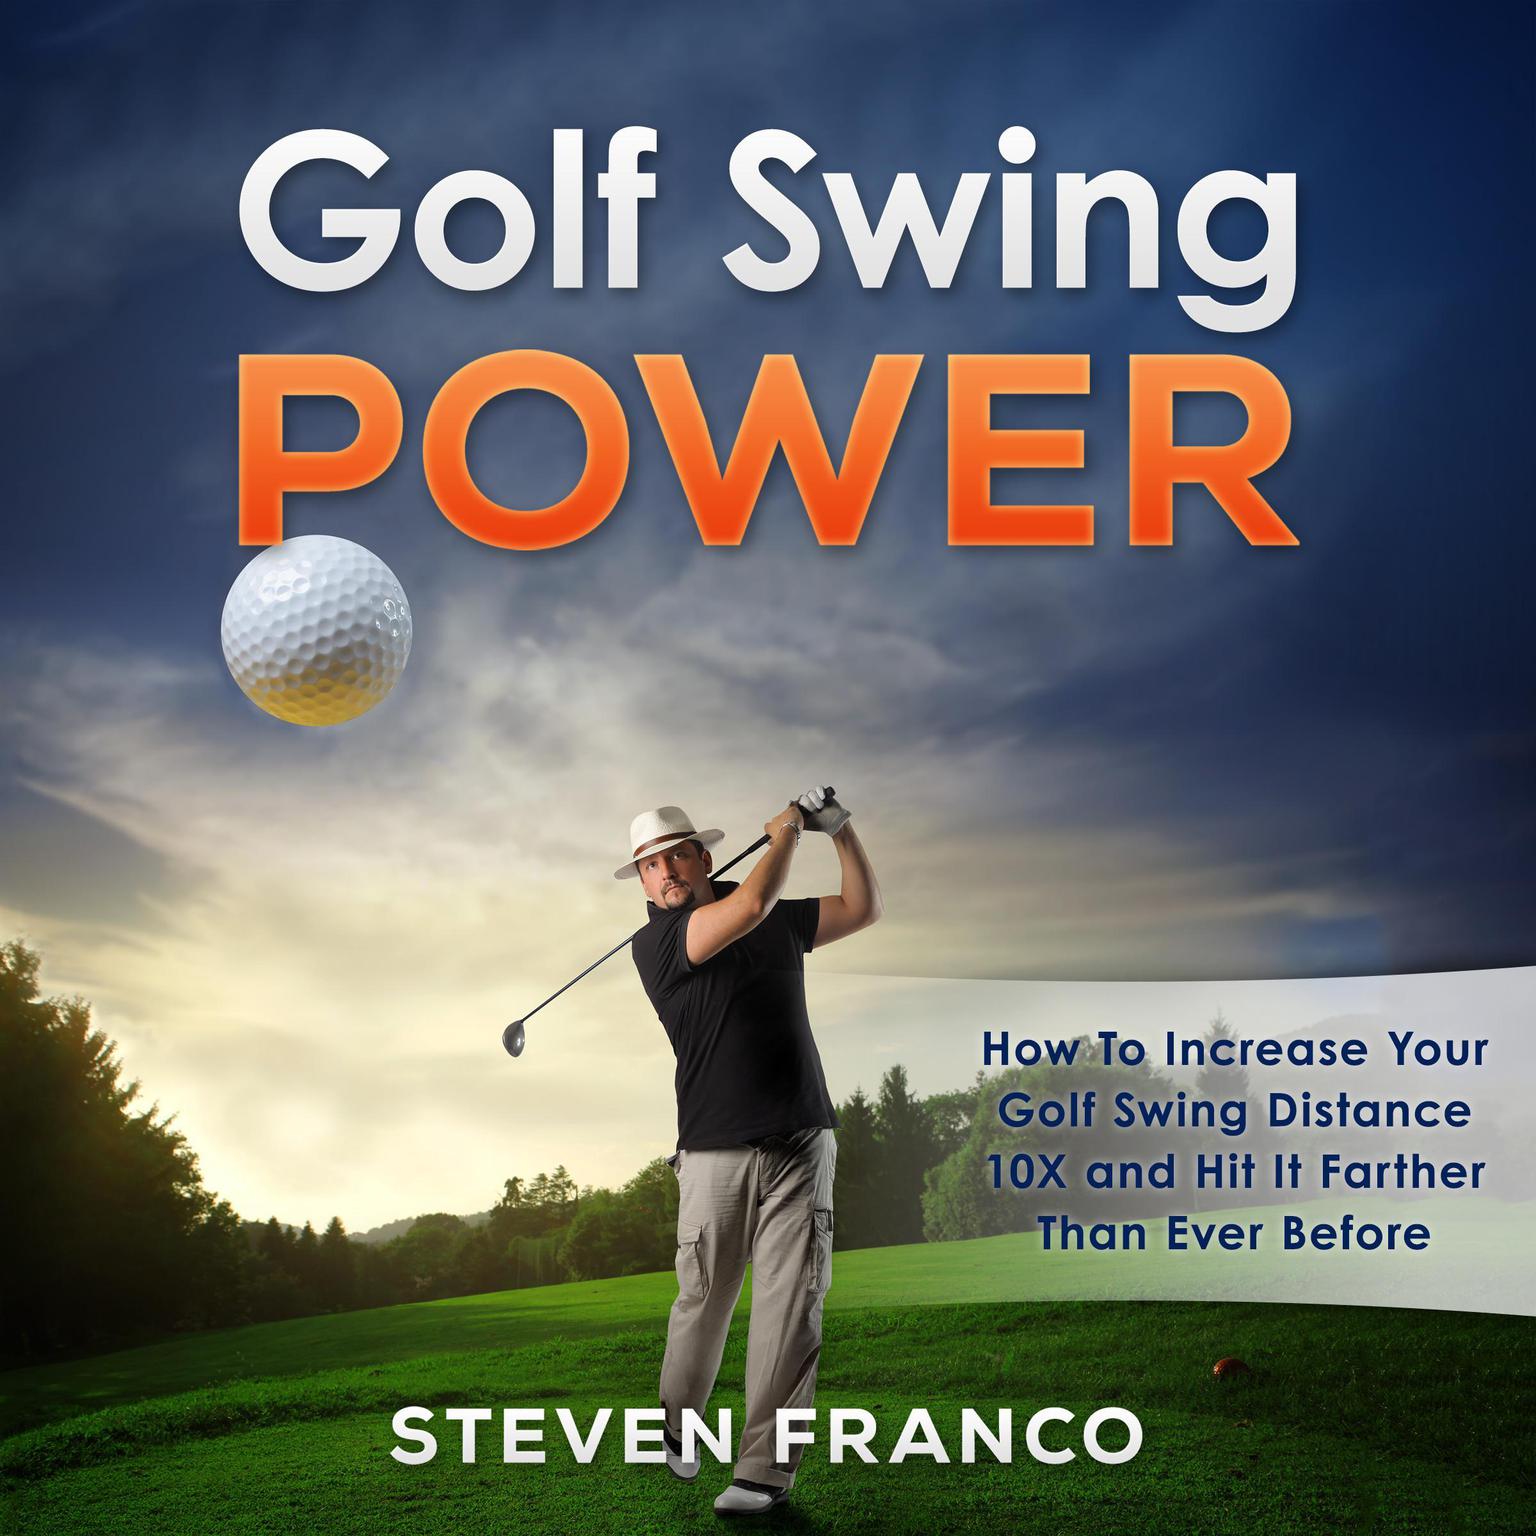 Golf Swing Power: How to Increase Your Golf Swing Distance 10X and Hit it Farther than Ever Before (Golf Mental Game, Golf Psychology & Golf Instruction, Golf Swing Techniques) Audiobook, by Steven Franco